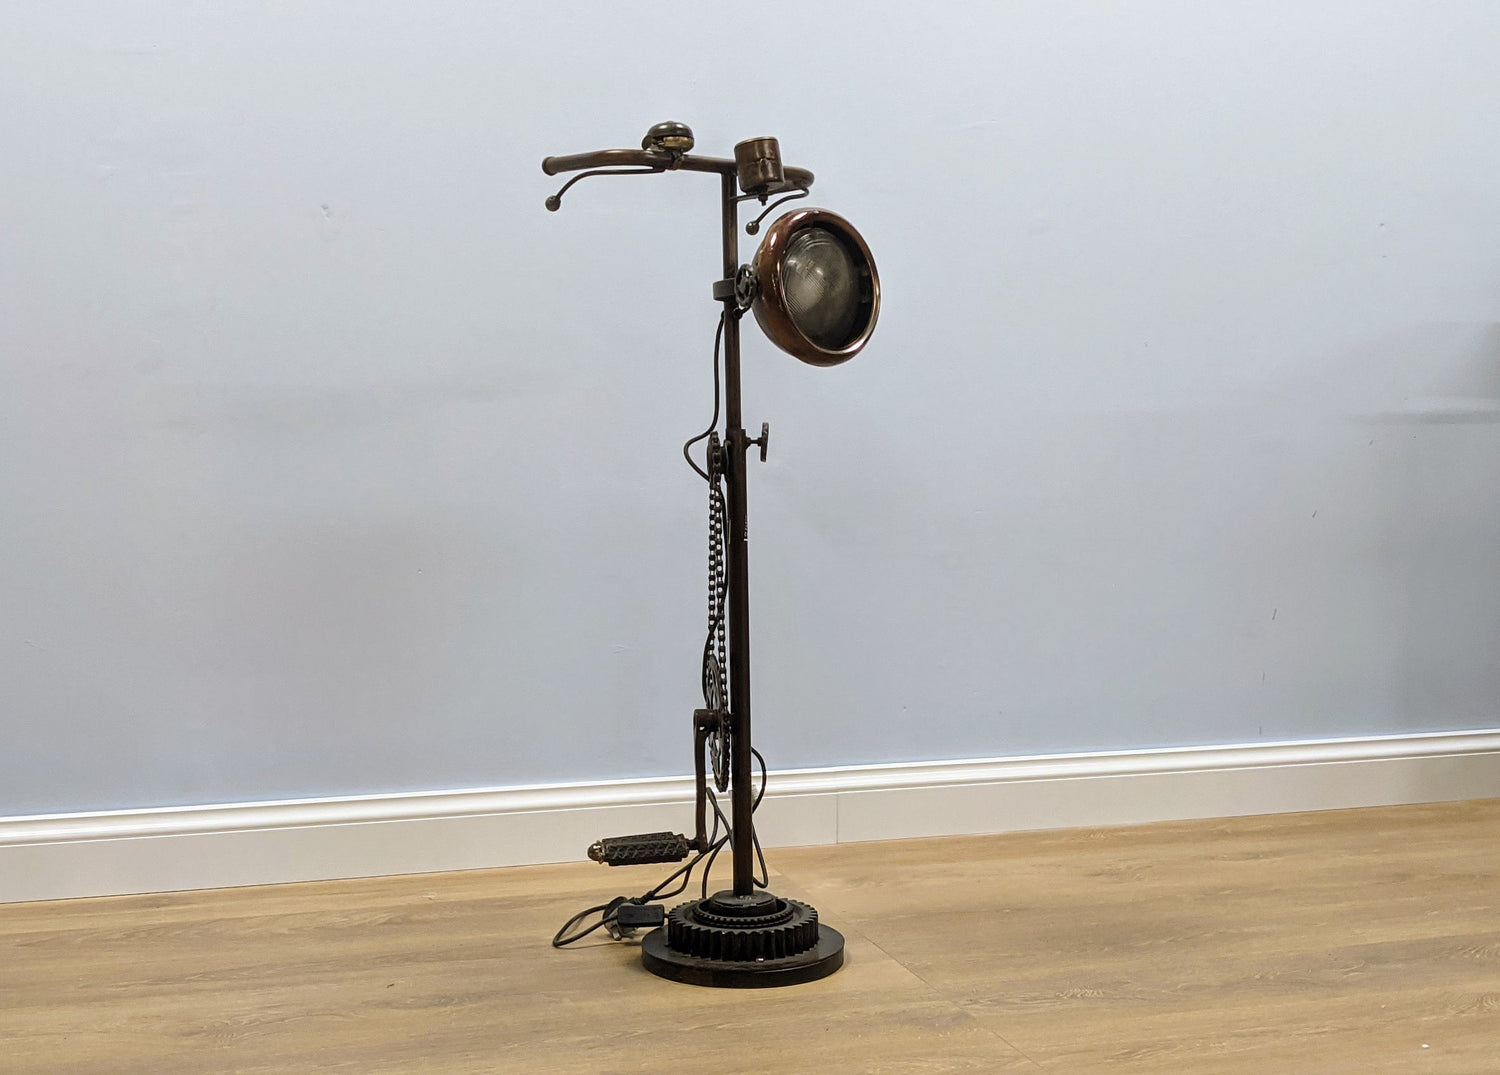 Water Pipe Floor Lamp serving as a stylish standing lamp, showcasing an industrial floor lamp design made from authentic water pipes.